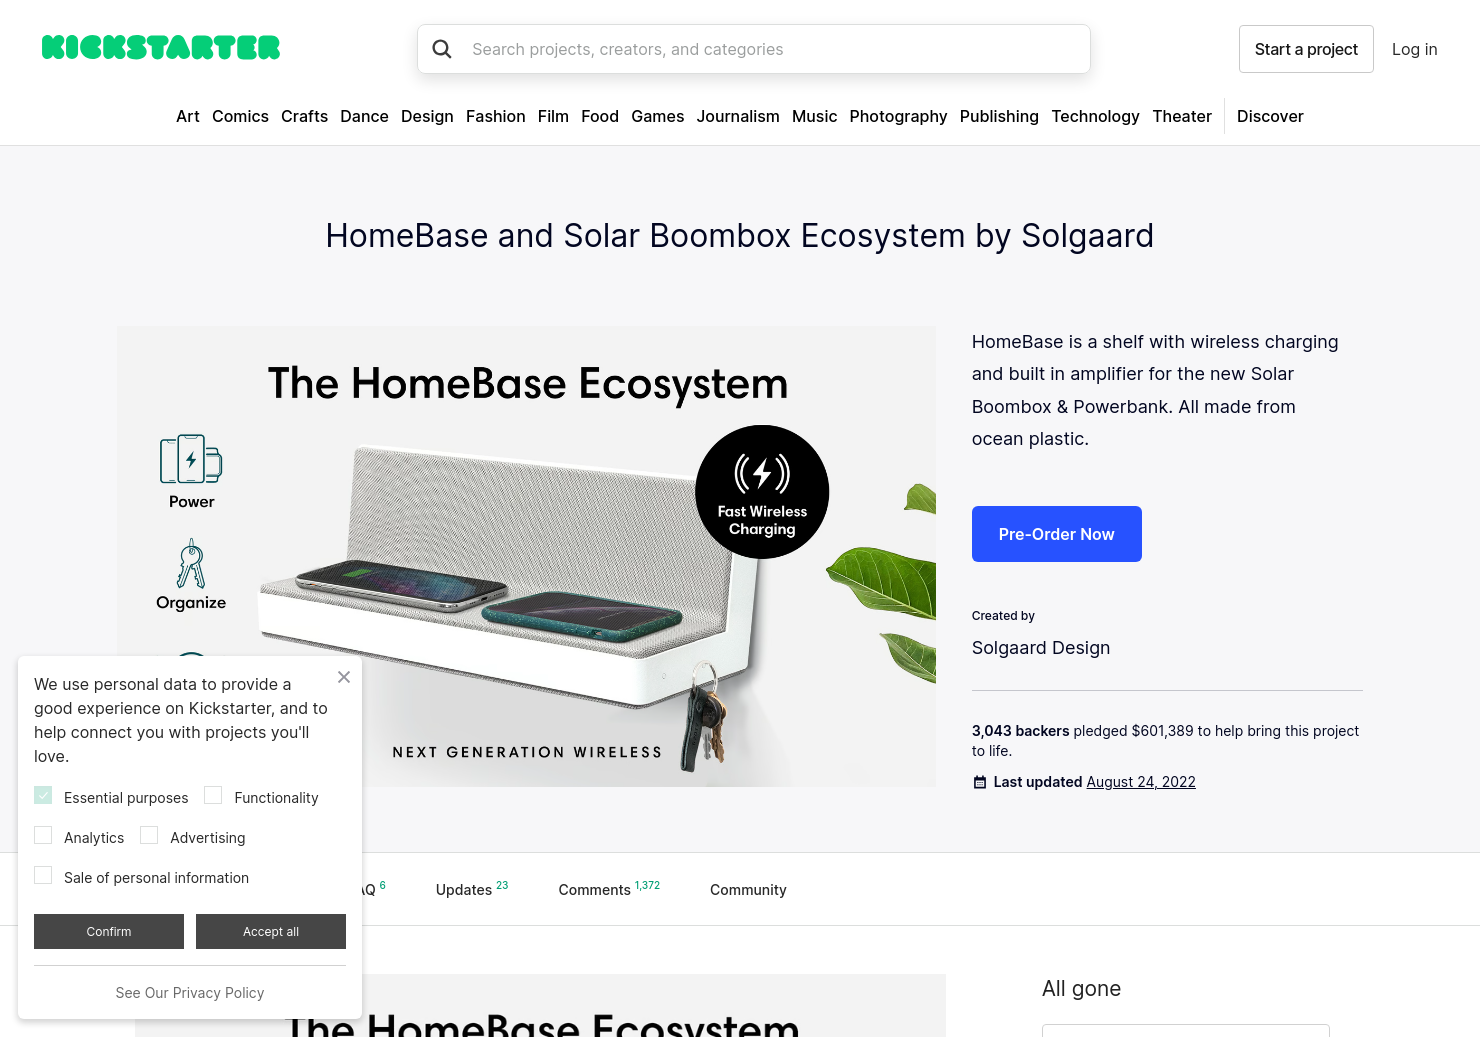 HomeBase + BoomBox Ecosystem by Solgaard